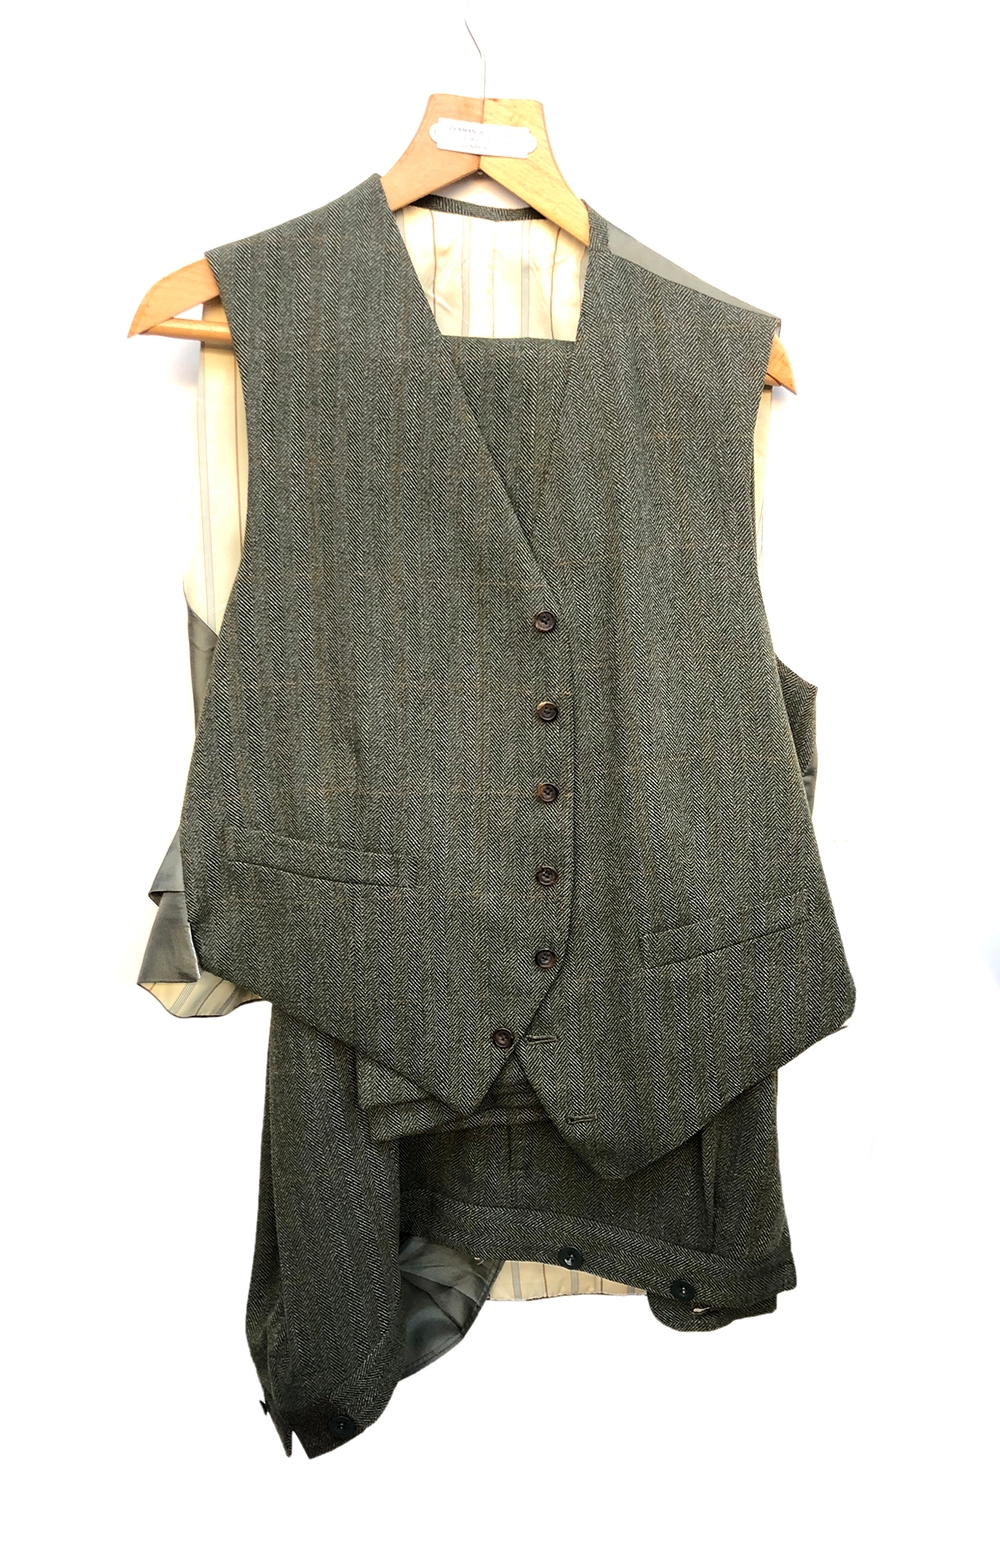 A Denman & Goddard three piece tweed suit c.1967, the trousers with button fly and brace buttons, - Image 2 of 2